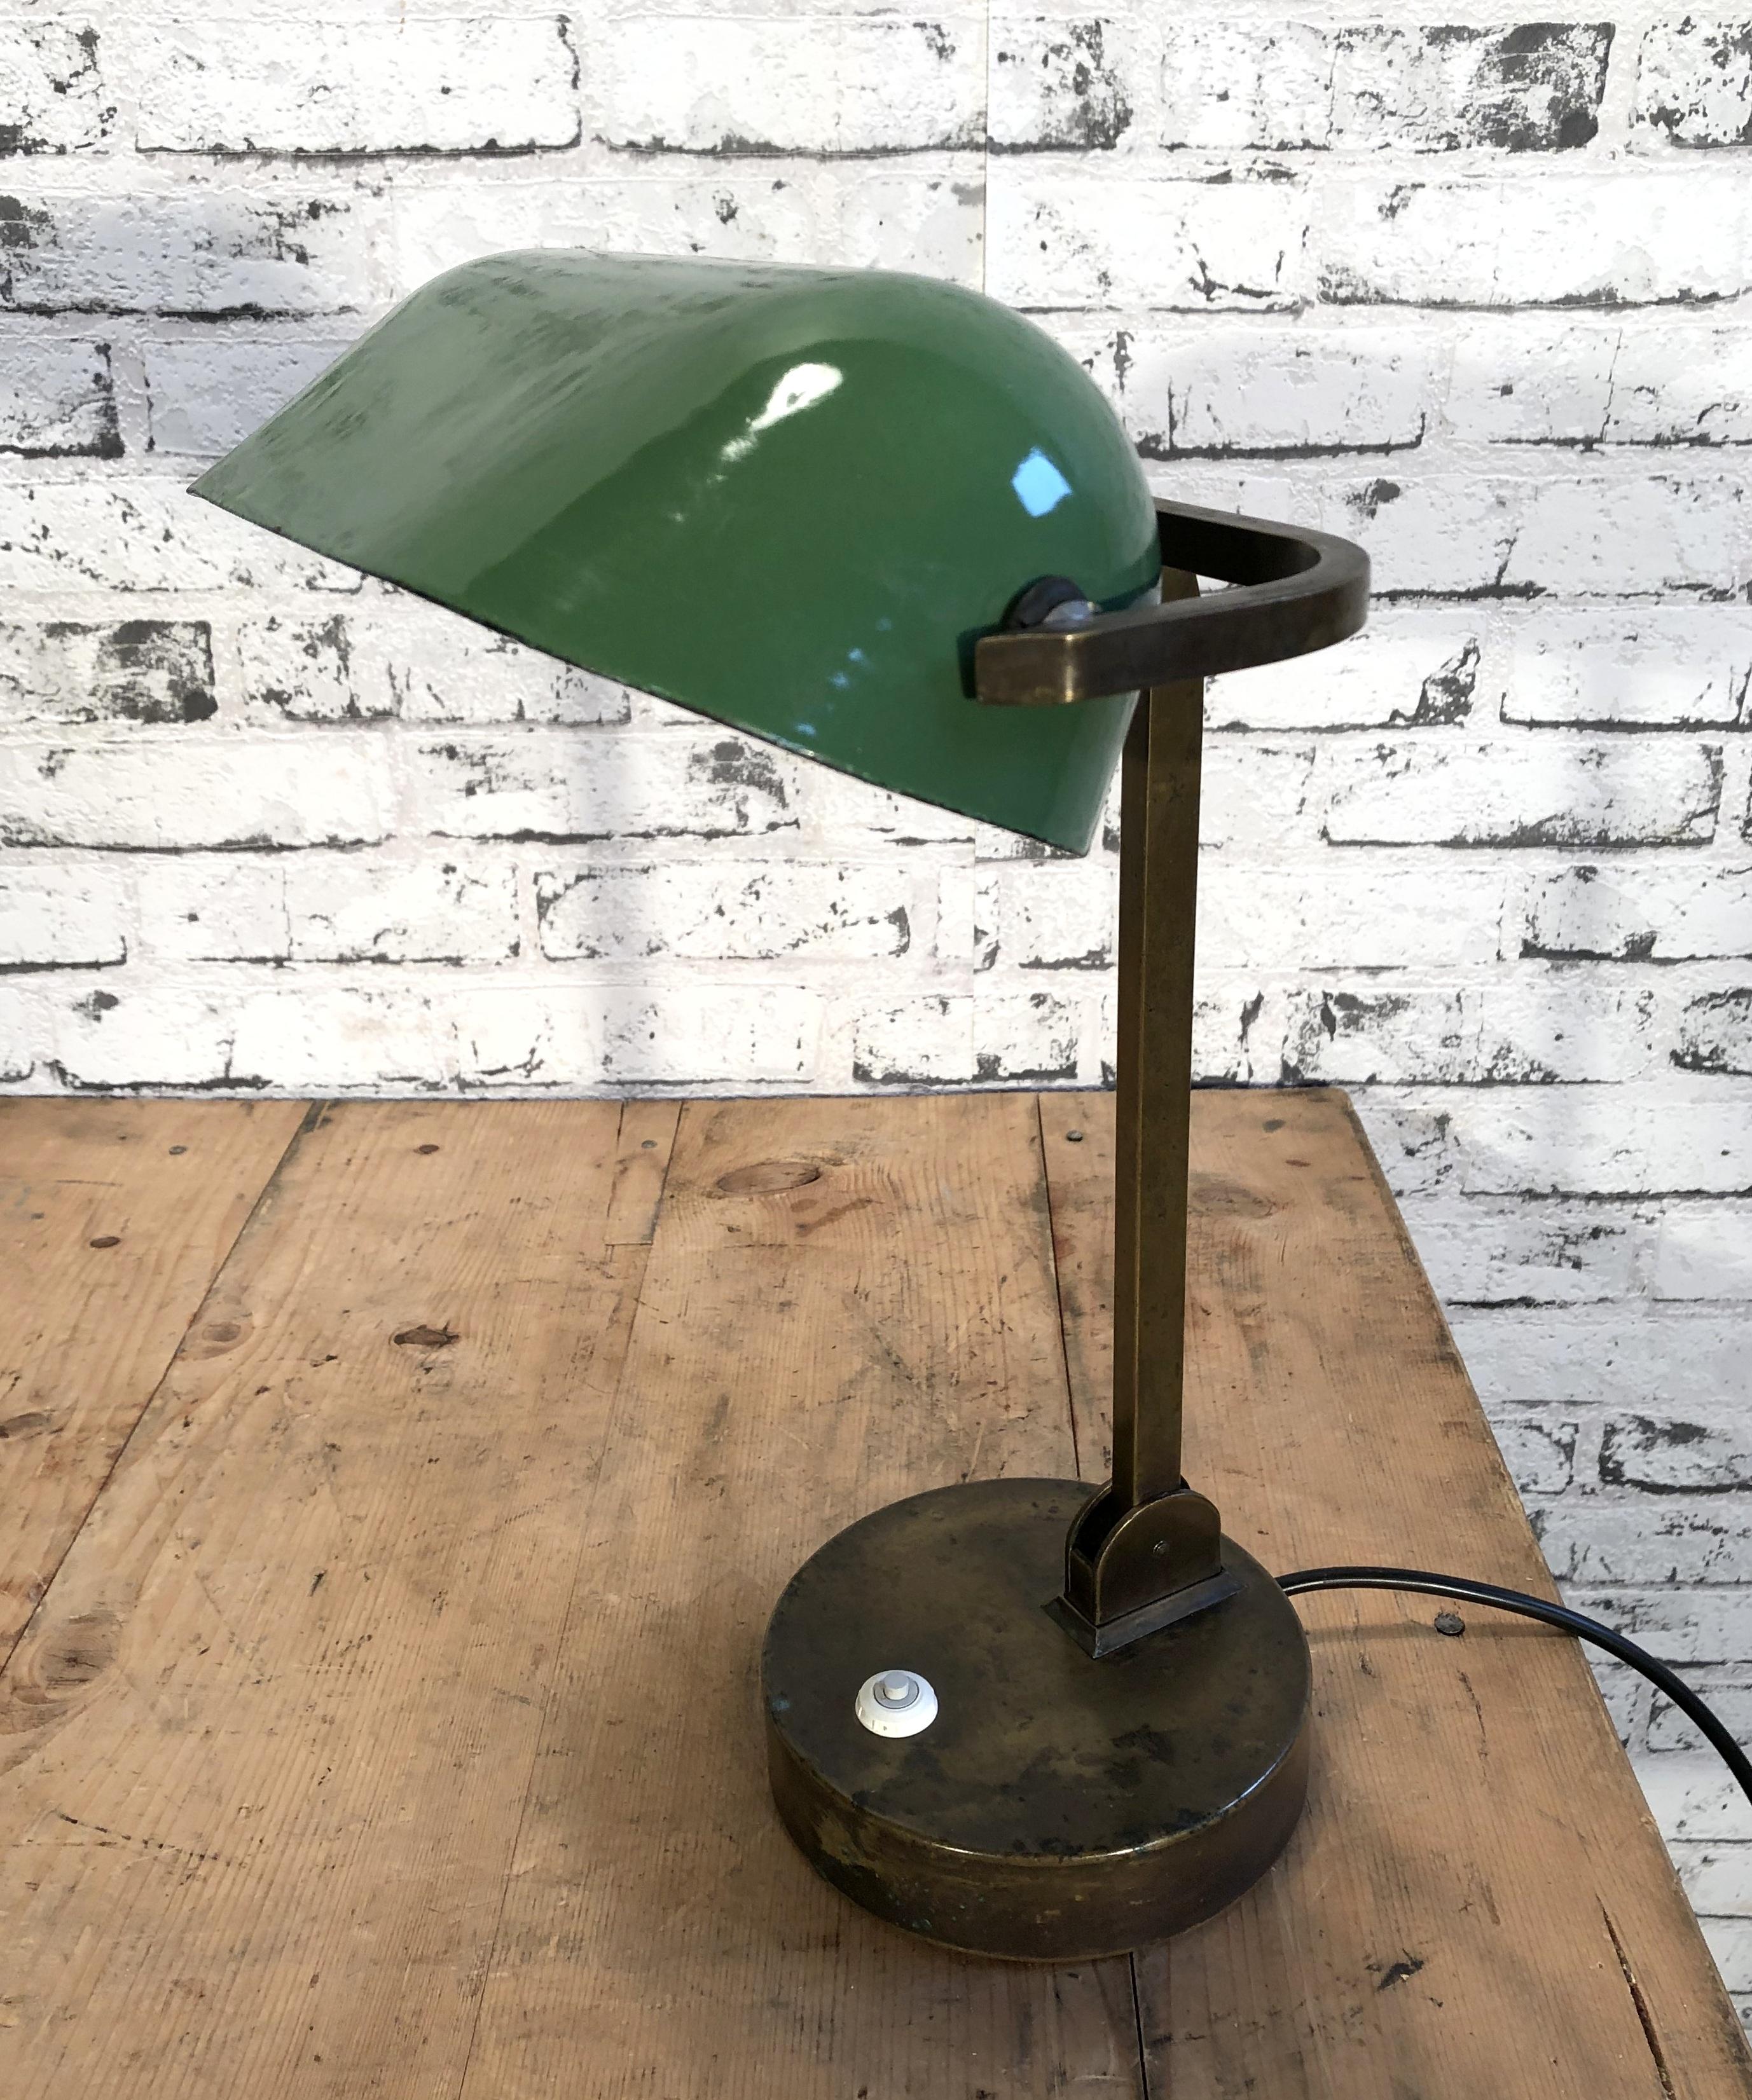 This green table lamp was made during the 1930s. It features a green enamel shade with a white enamel interior and a brass base. Original socket takes an E 27 bulbs. New wire. Fully functional.
Dimensions of the shade: 22 cm x 13 cm.